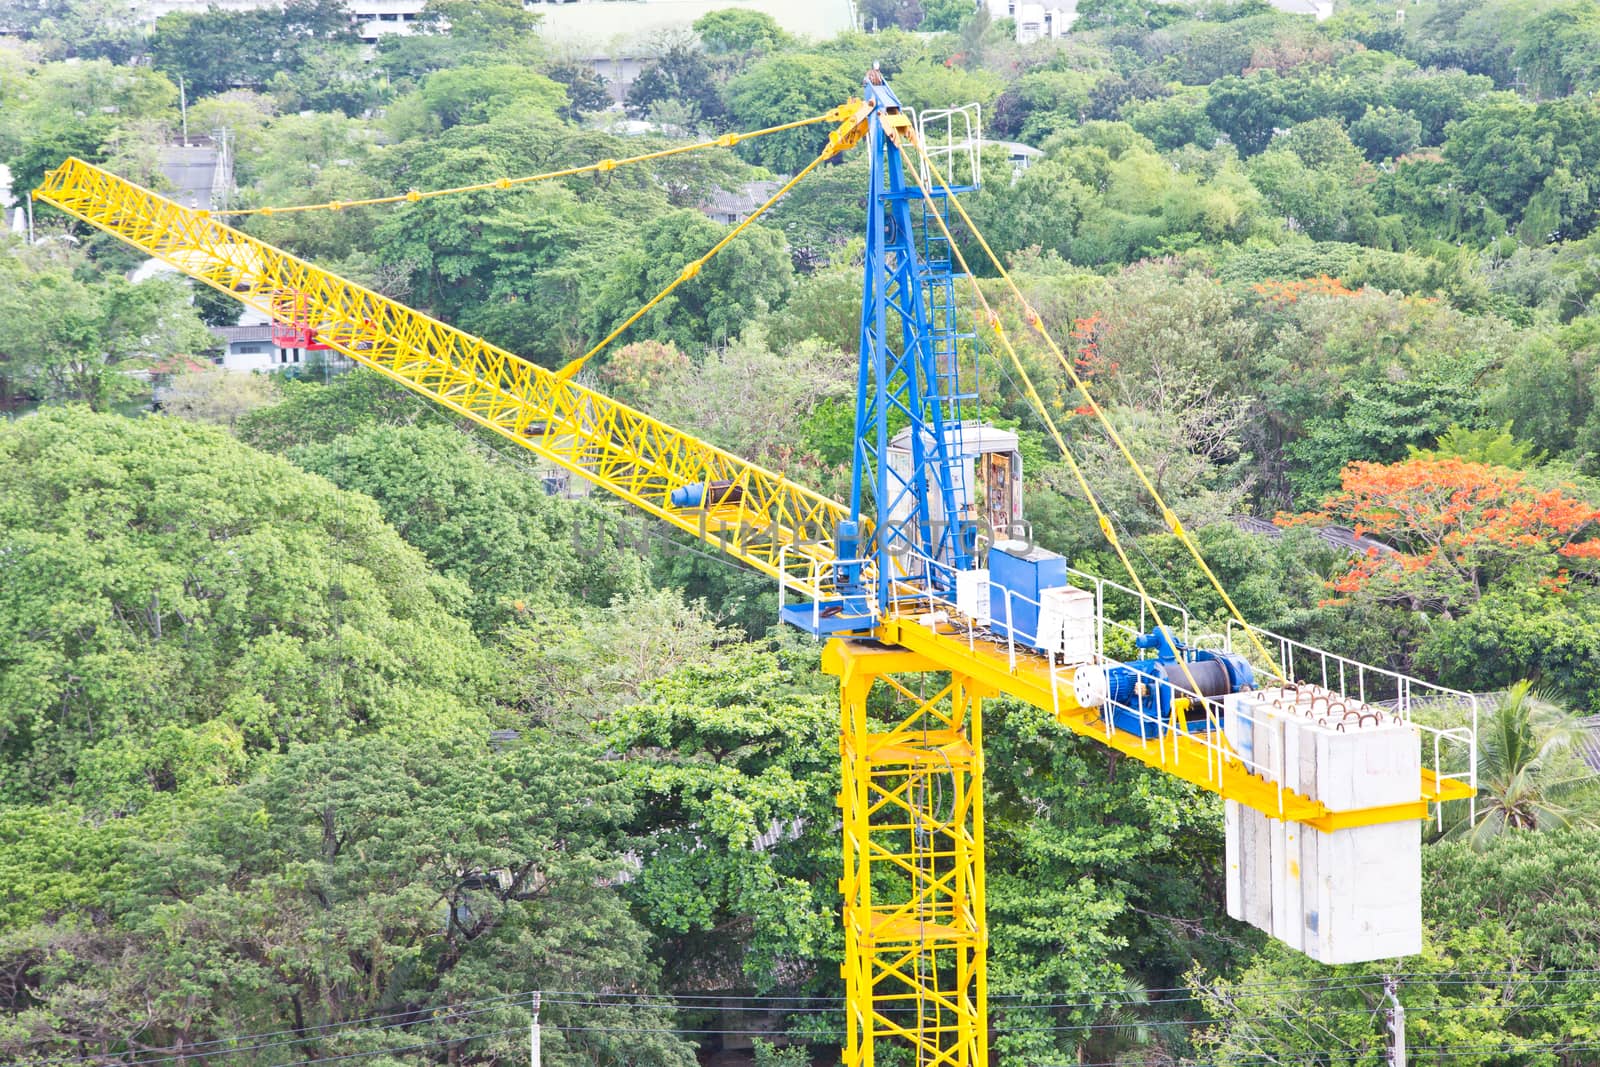 Crane and building construction site in green natural area